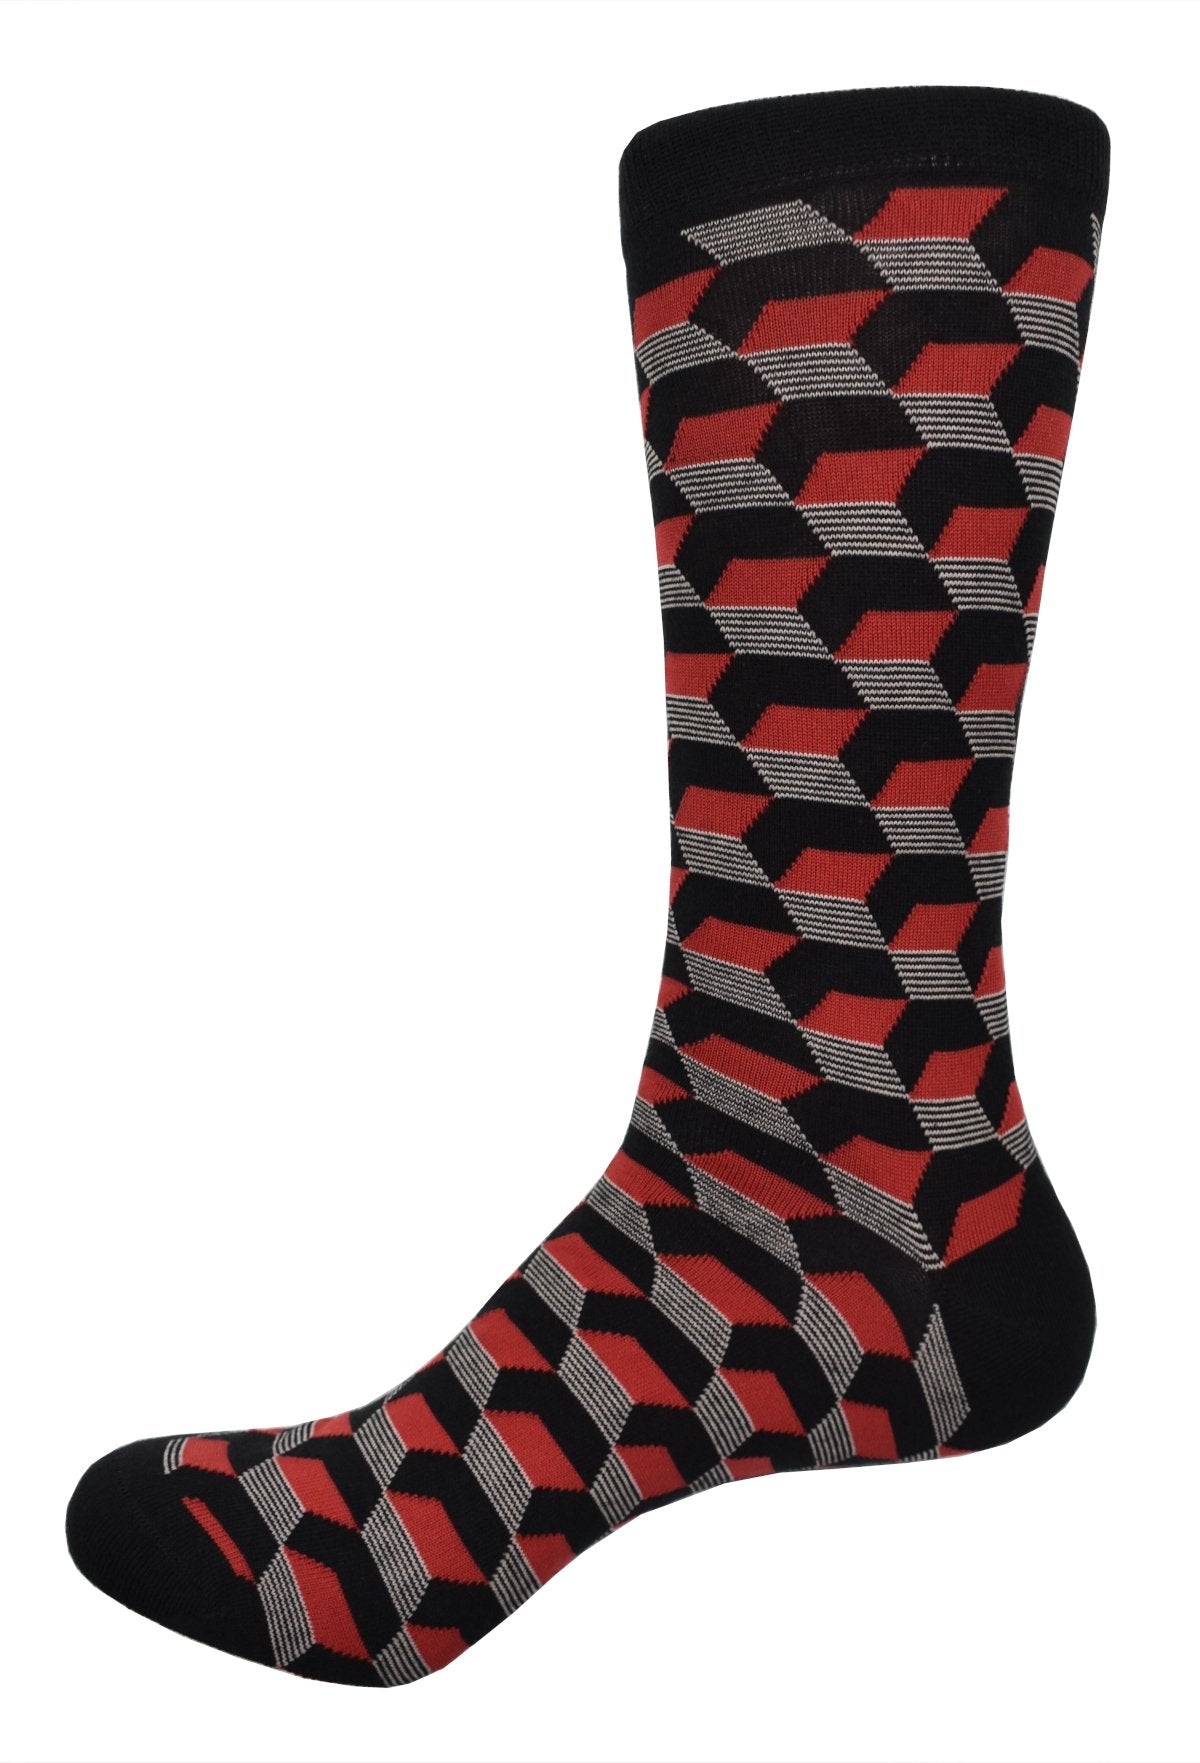 Elevate your sock game with Black Red Dimensions Socks. Made with fine mercerized cotton, these socks feature a cool geometric pattern in black, red, and silver accents. Perfect for pairing with jeans or pants, these socks will add a touch of sophistication to any outfit.